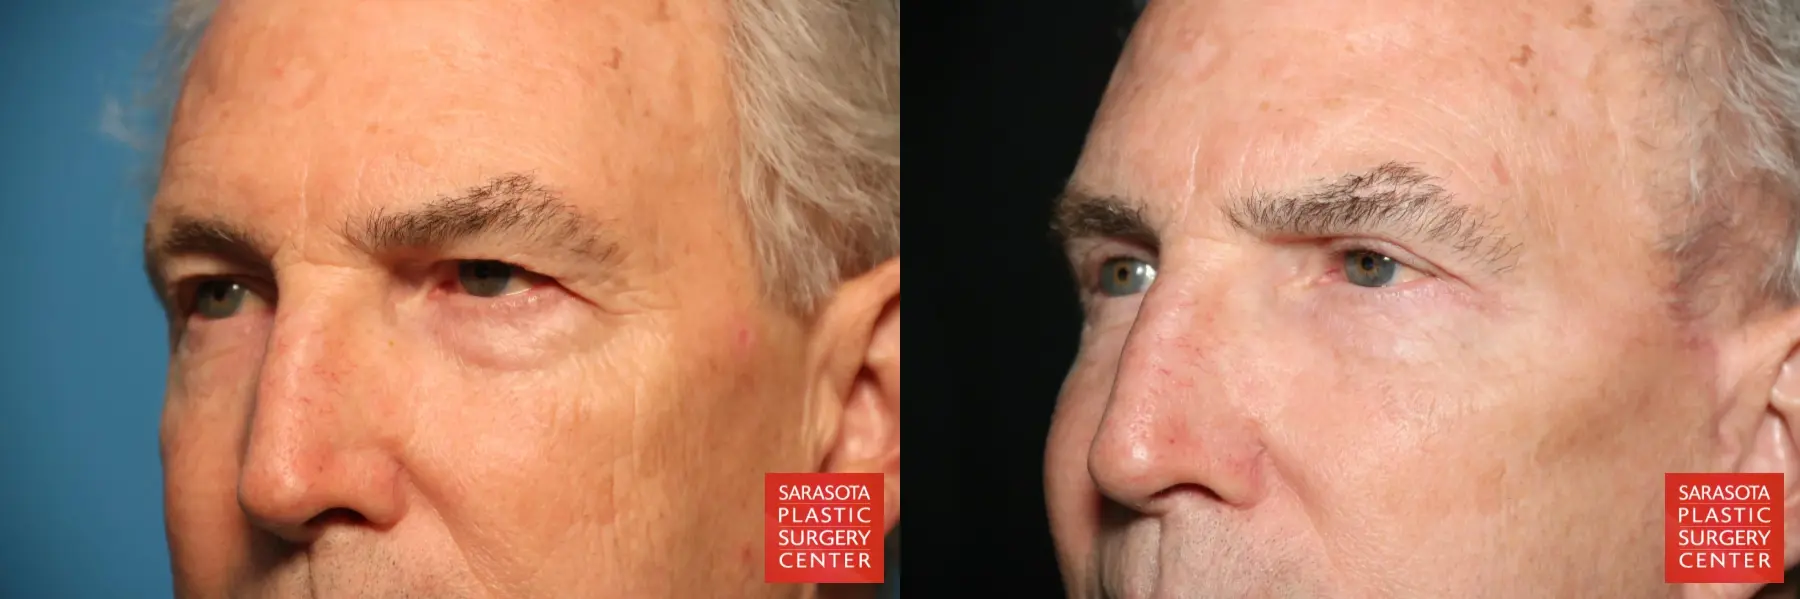 Eyelid Surgery: Patient 7 - Before and After 4